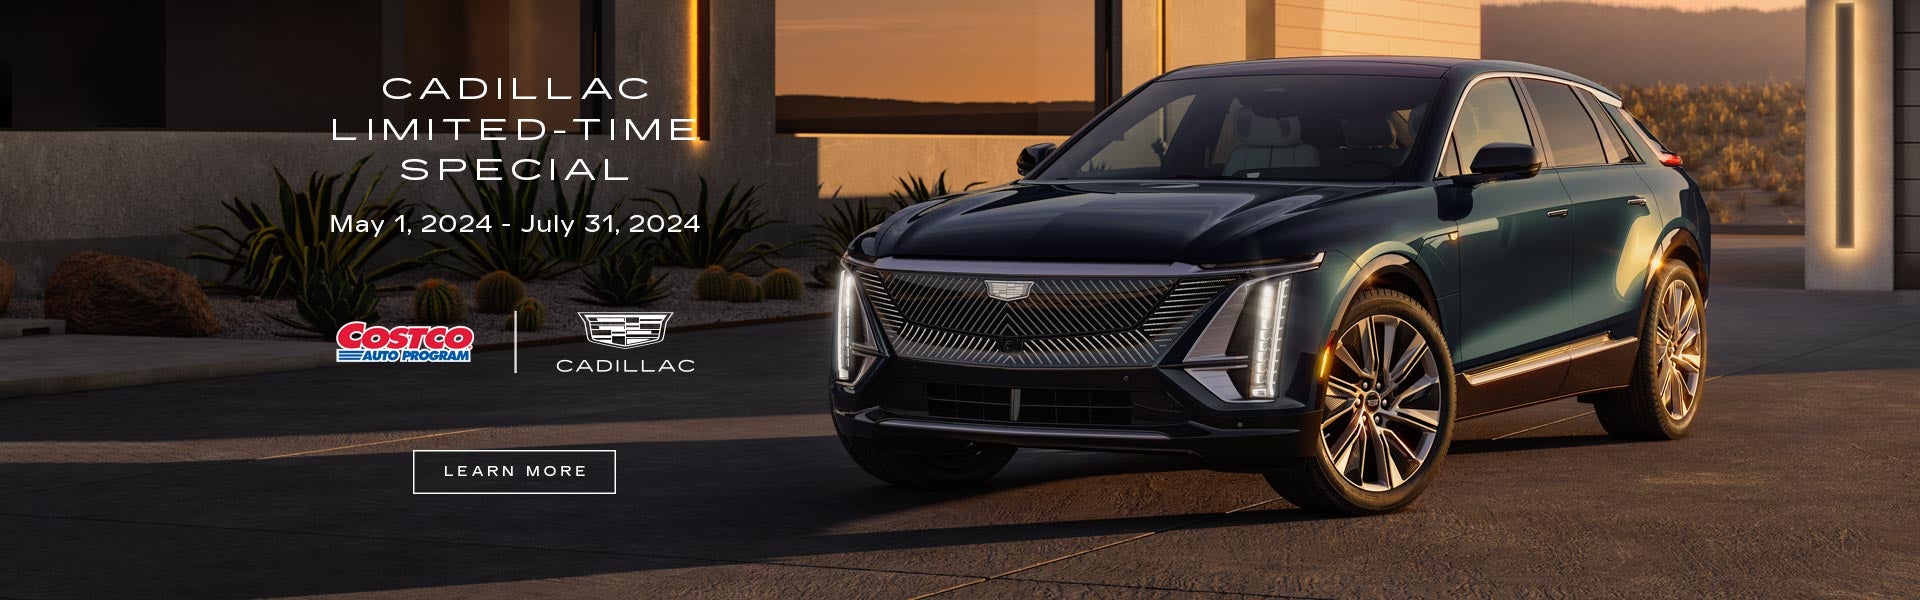 Cadillac limited time special $1,000 Costco member only incentive.